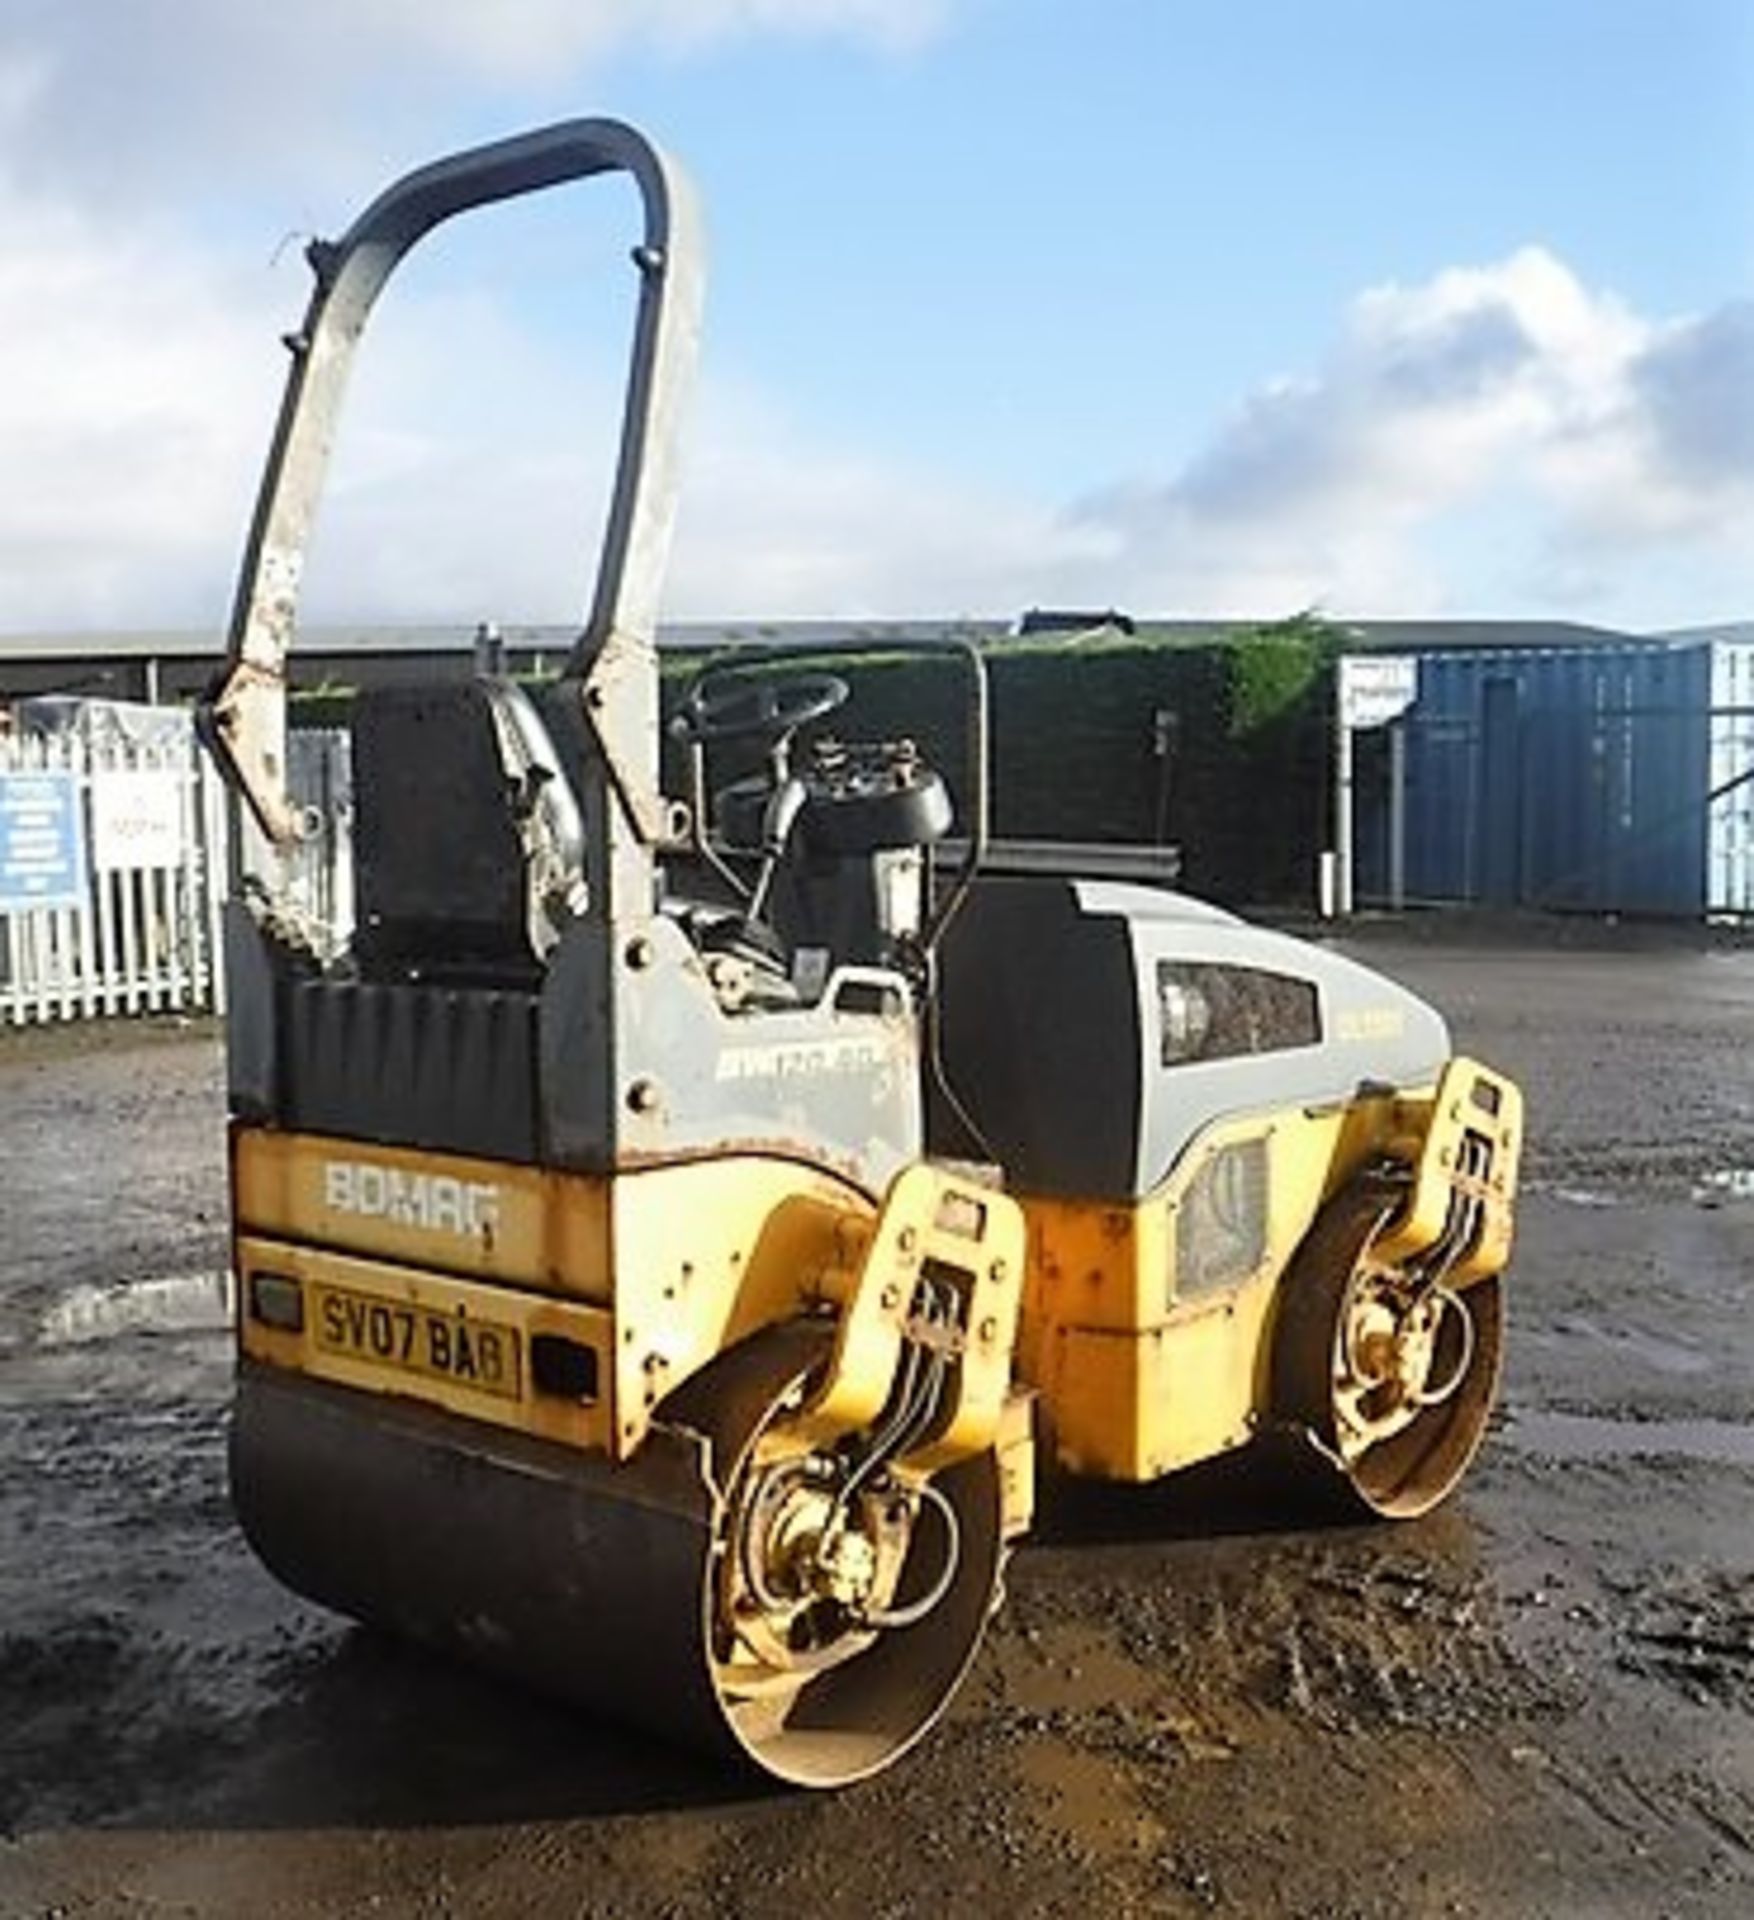 2006 BOMAG roller BW120AD-4 REG NO SV07 BAO 1022 hrs (not verified)SN - 101880023247 - Image 5 of 13